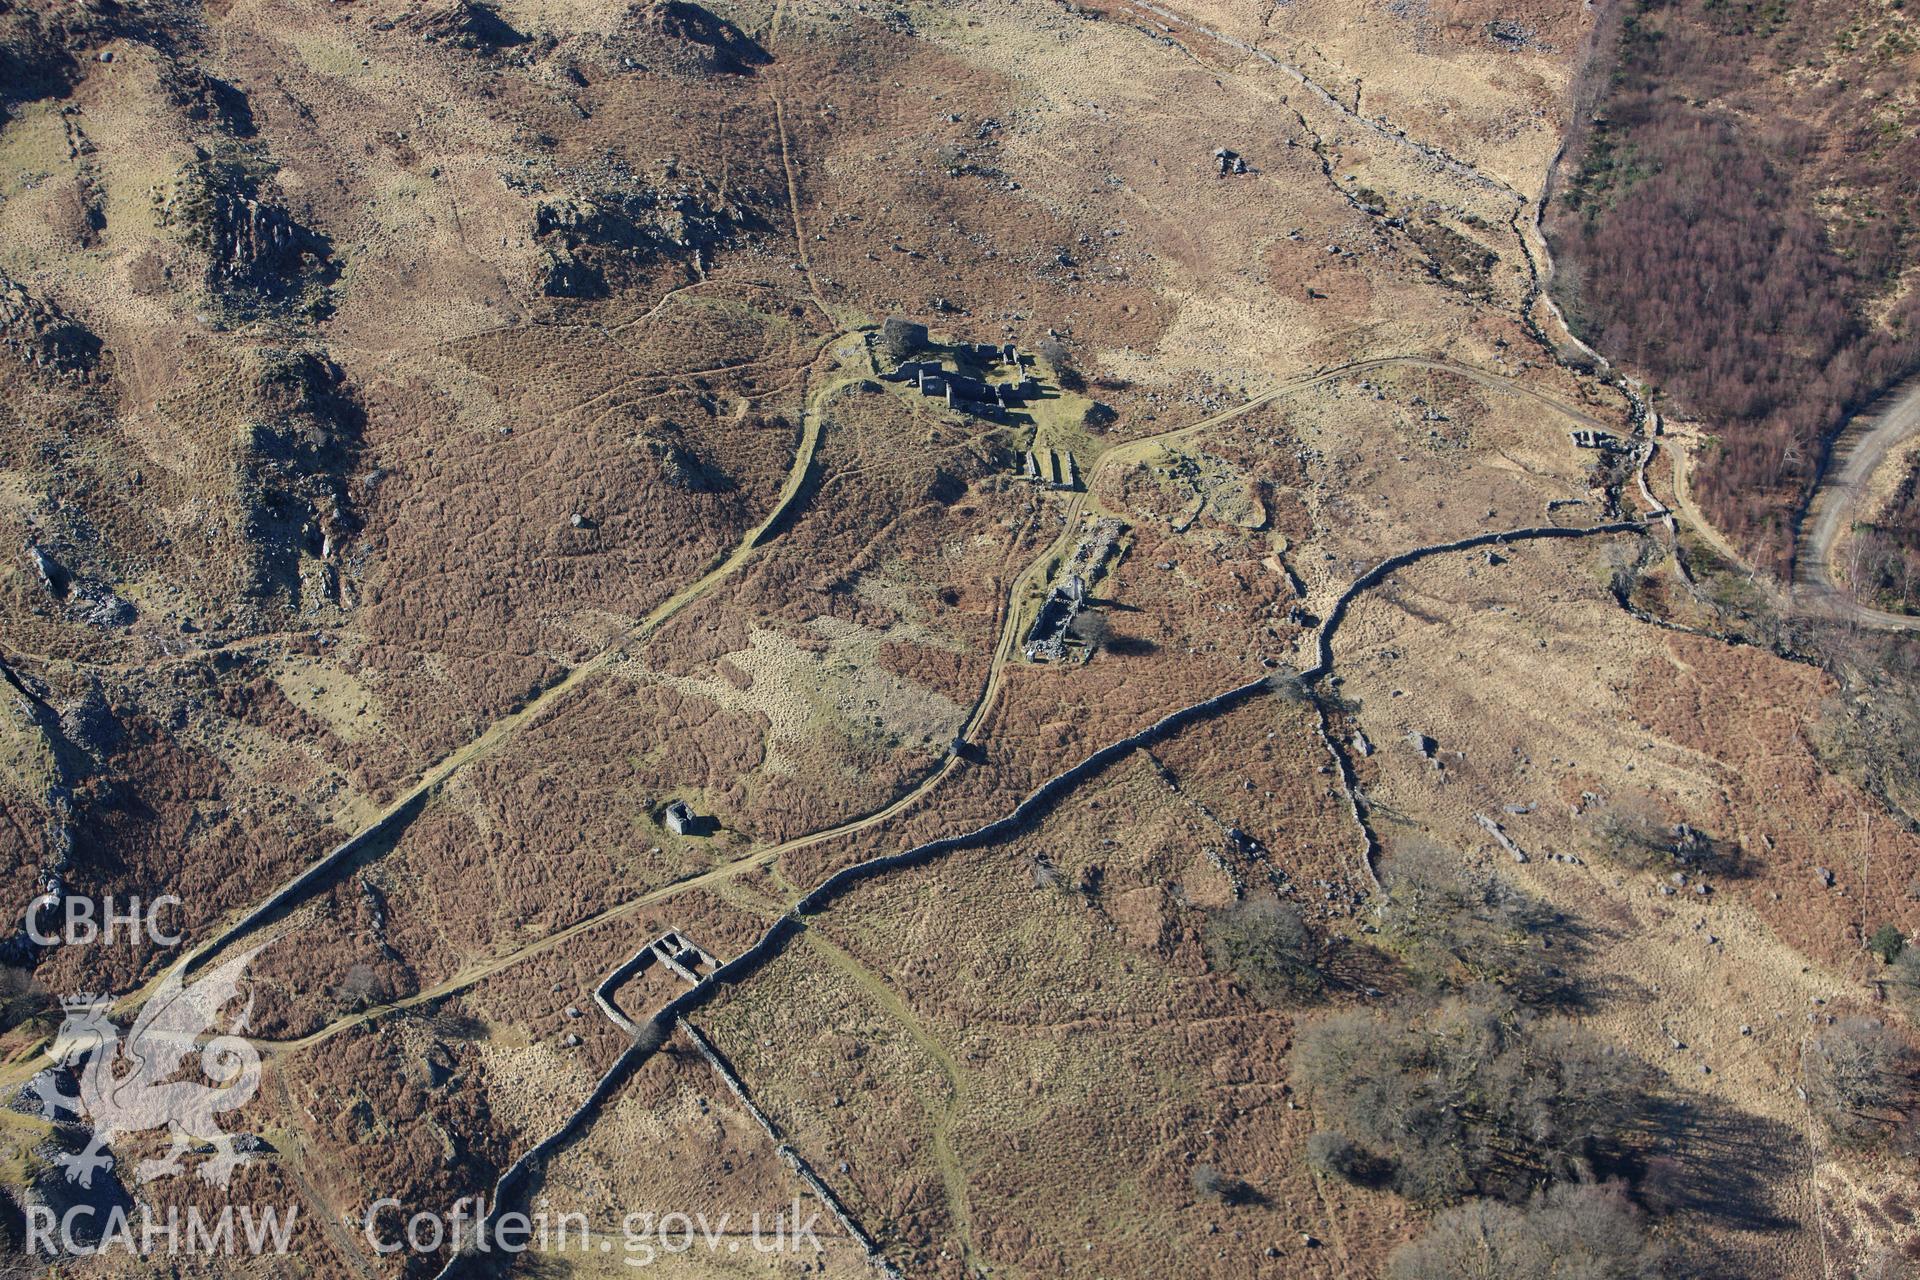 RCAHMW colour oblique photograph of Berth-Llwyd and Cefn Coch gold mining complex. Taken by Toby Driver on 08/03/2010.